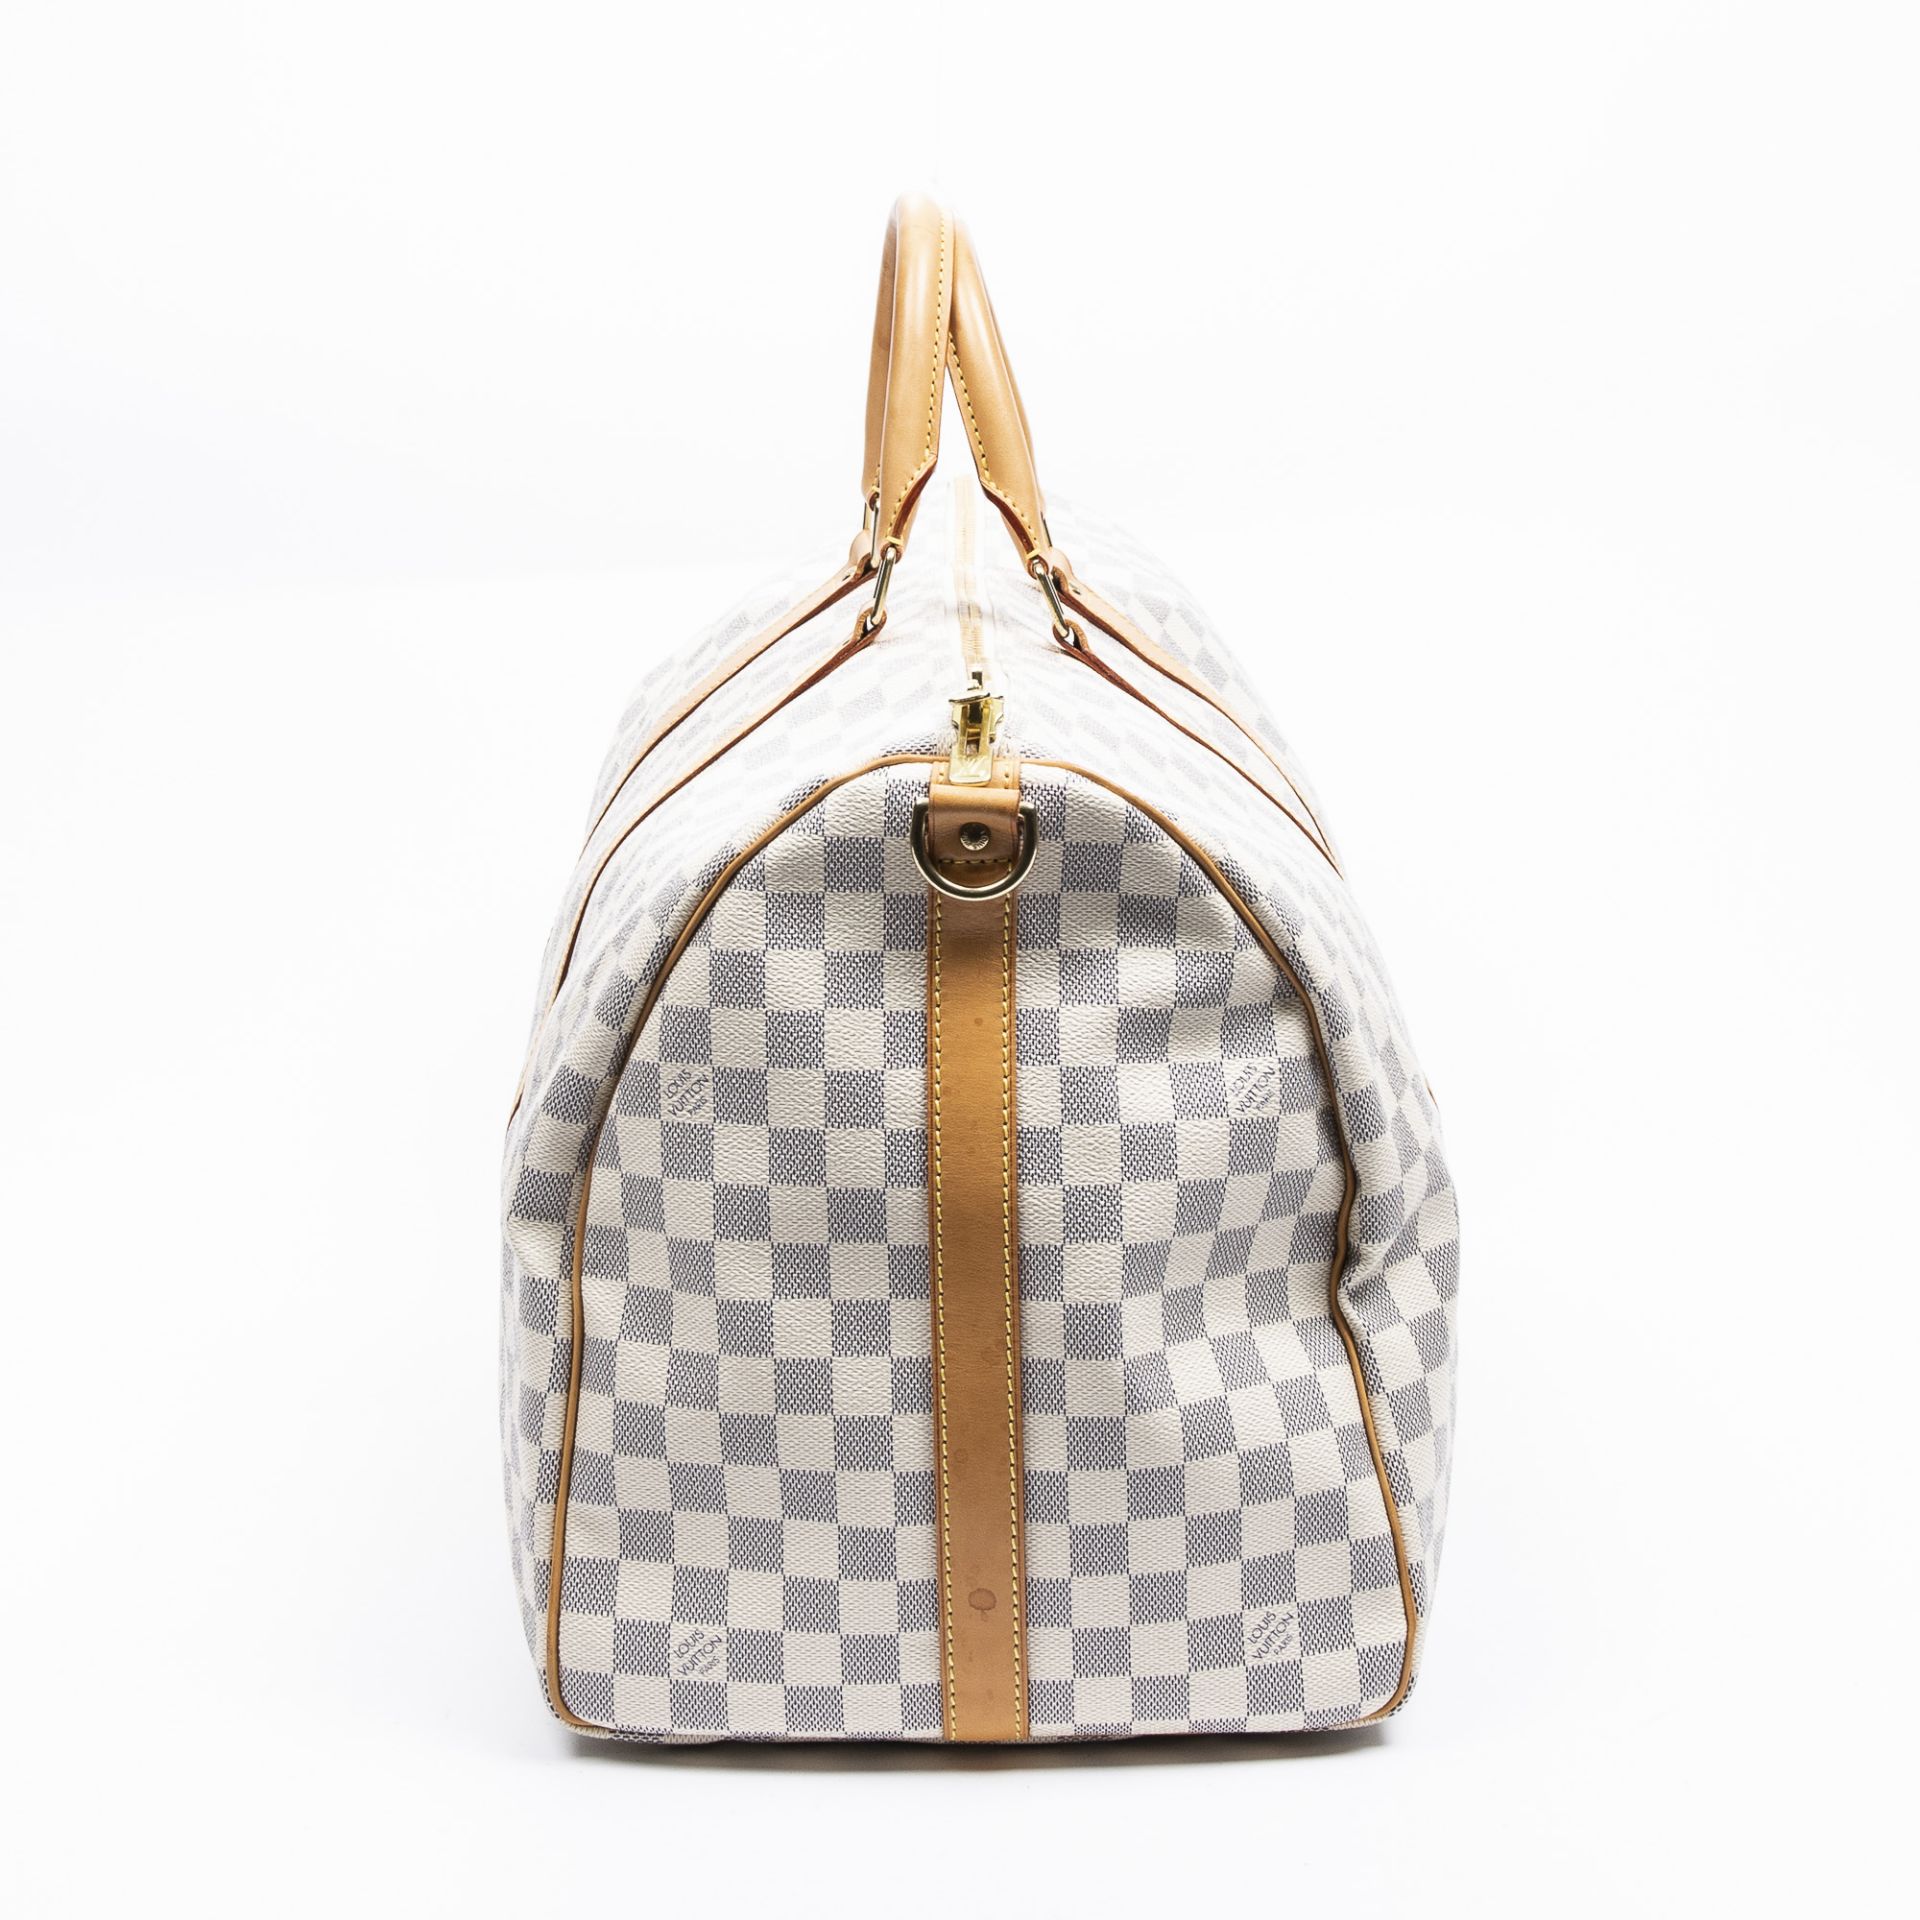 RRP £1,300.00 Lot To Contain 1 Louis Vuitton Coated Canvas Keepall Bandouliere Shoulder Bag In Ivory - Image 3 of 3